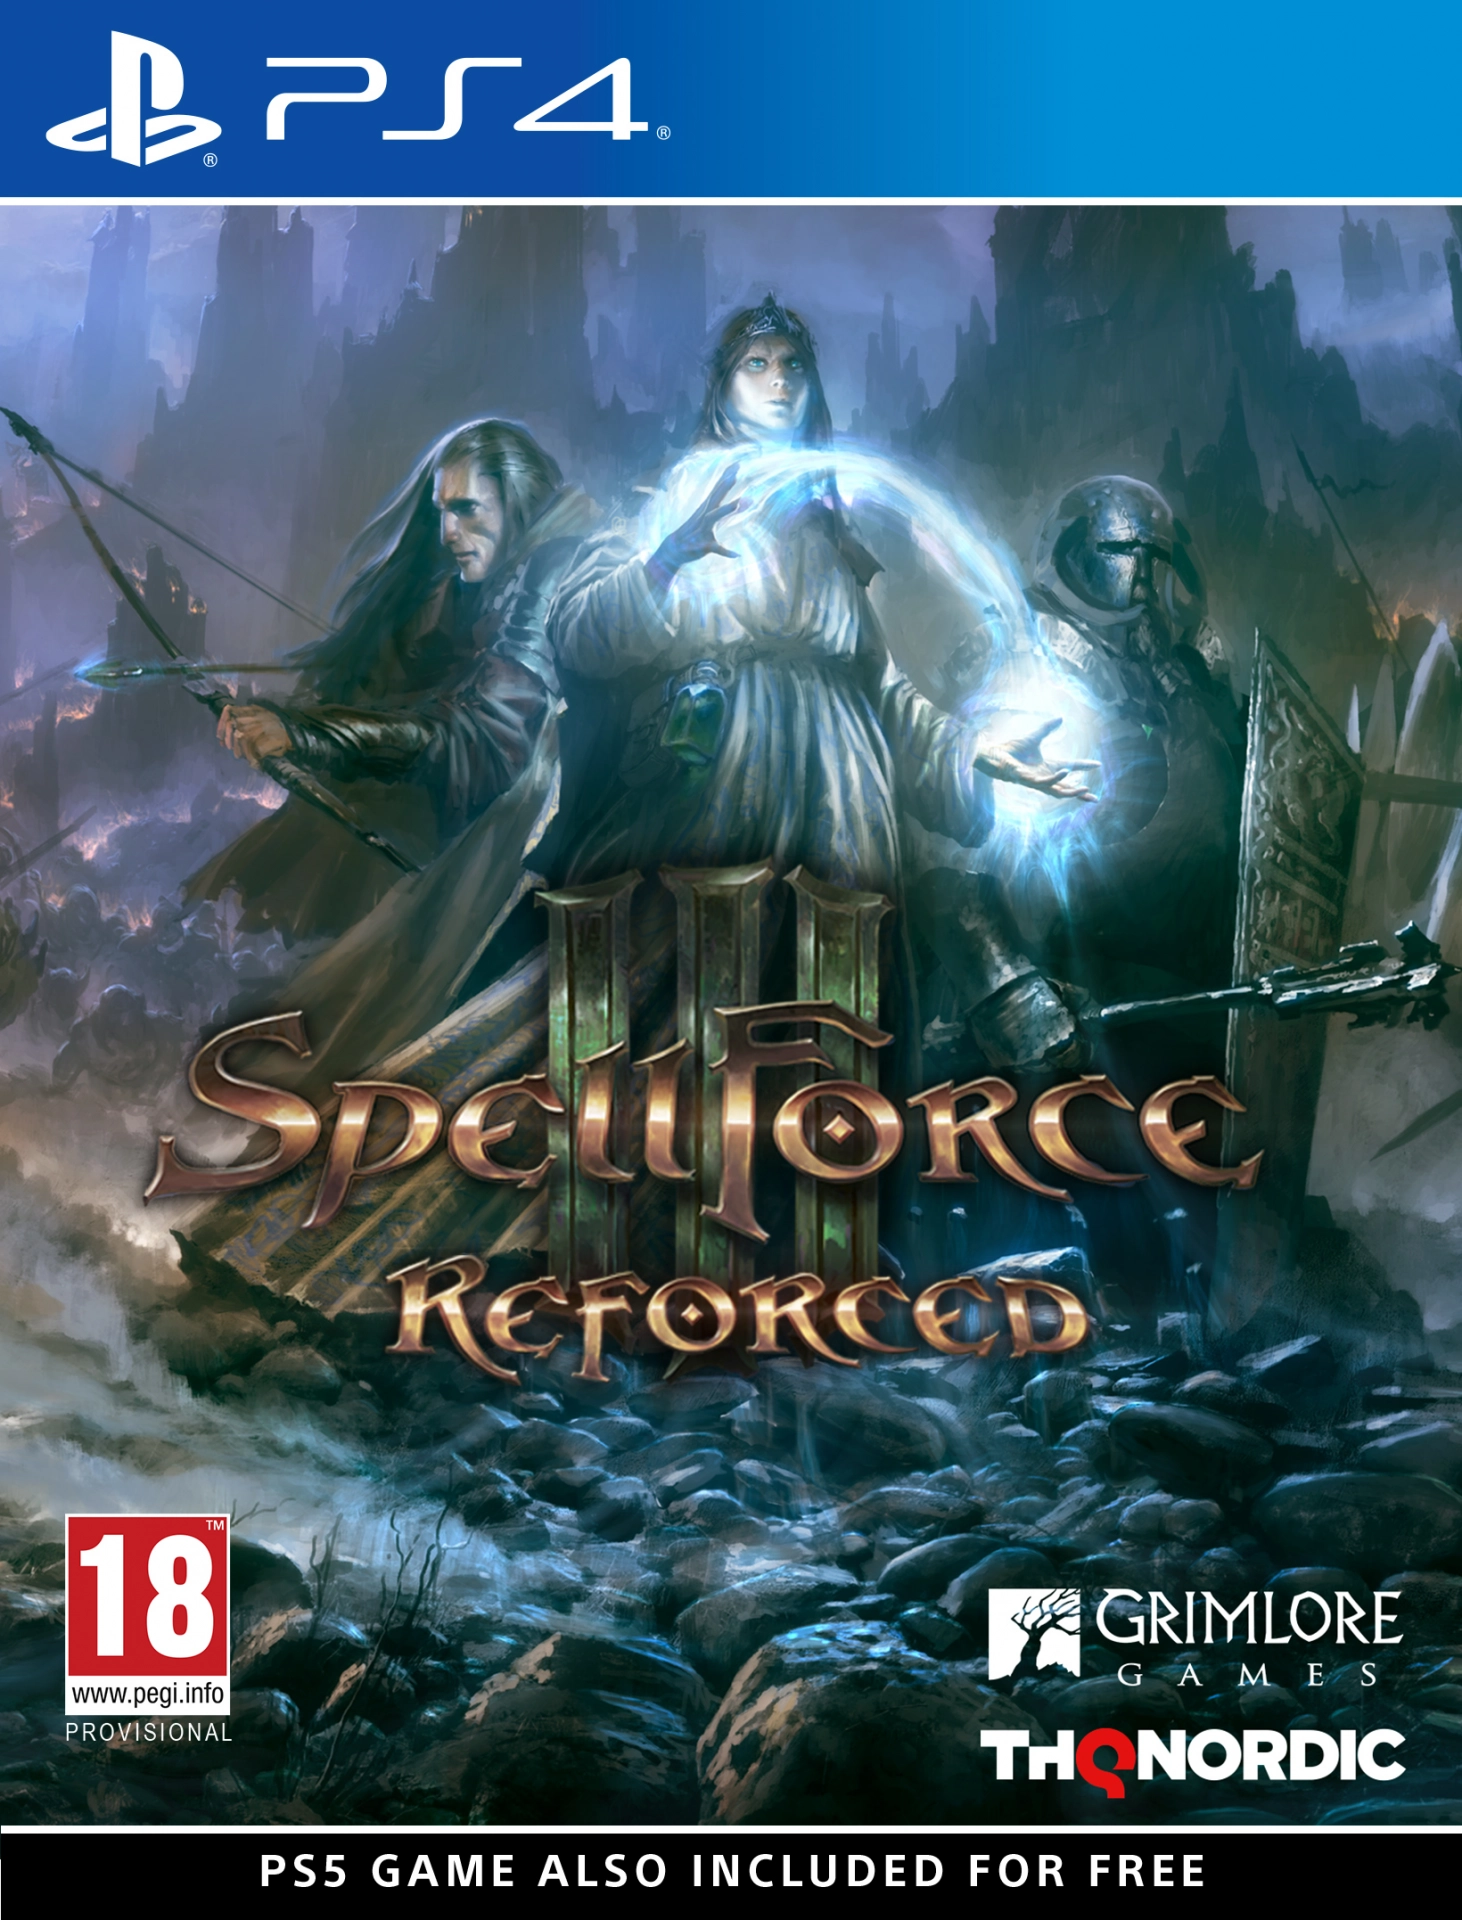 Spellforce 3: Reforced (PS4), Grimlore Games